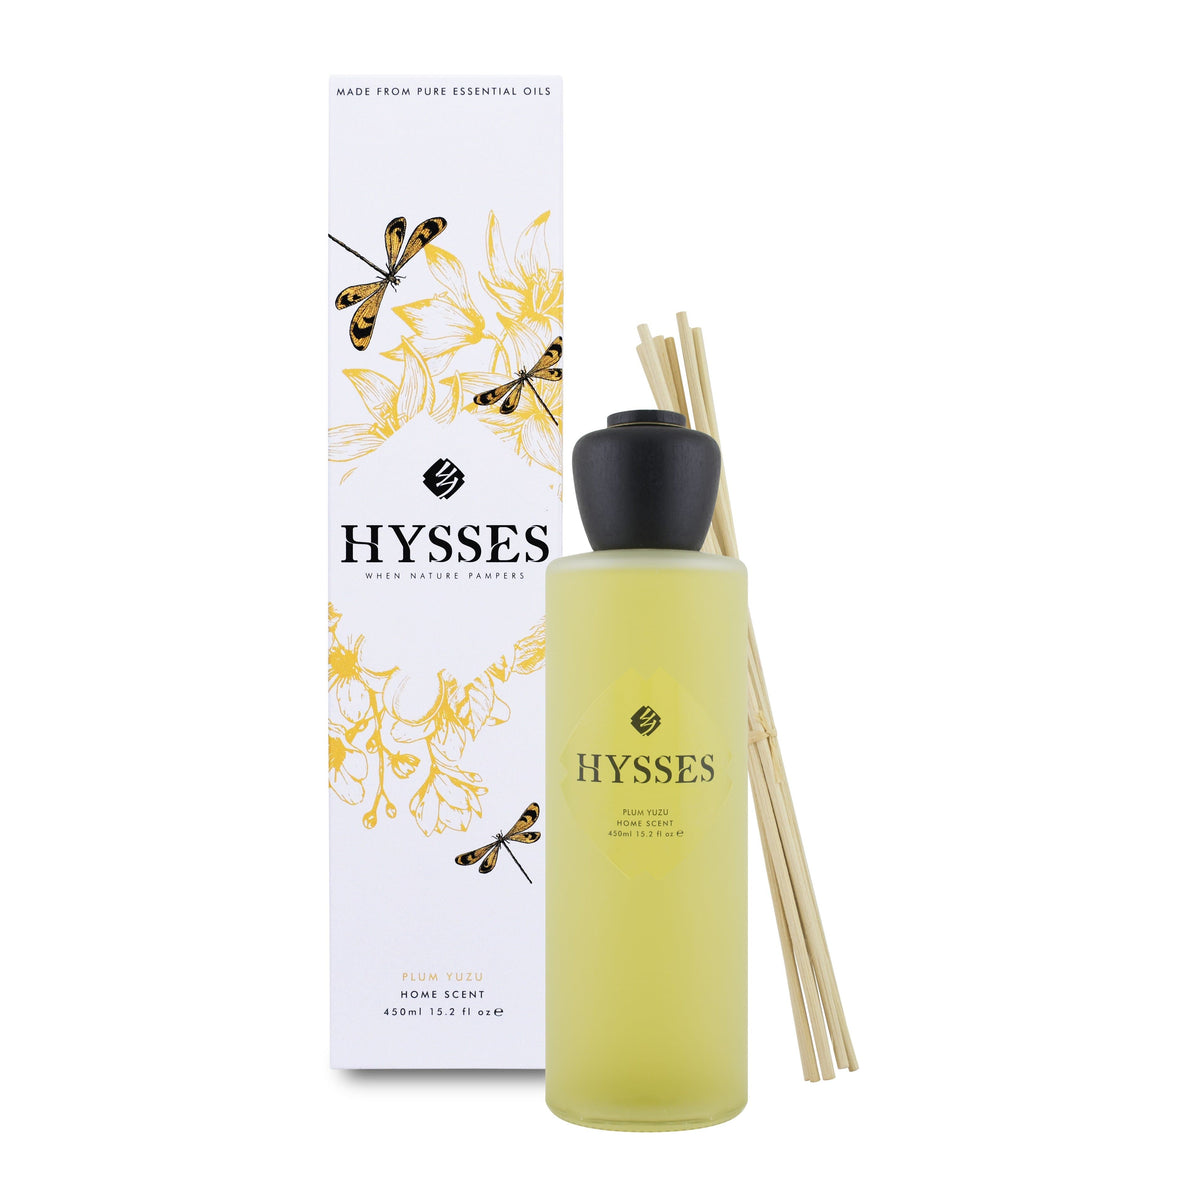 Hysses Home Scents 450ml Home Scent Reed Diffuser Plum Yuzu